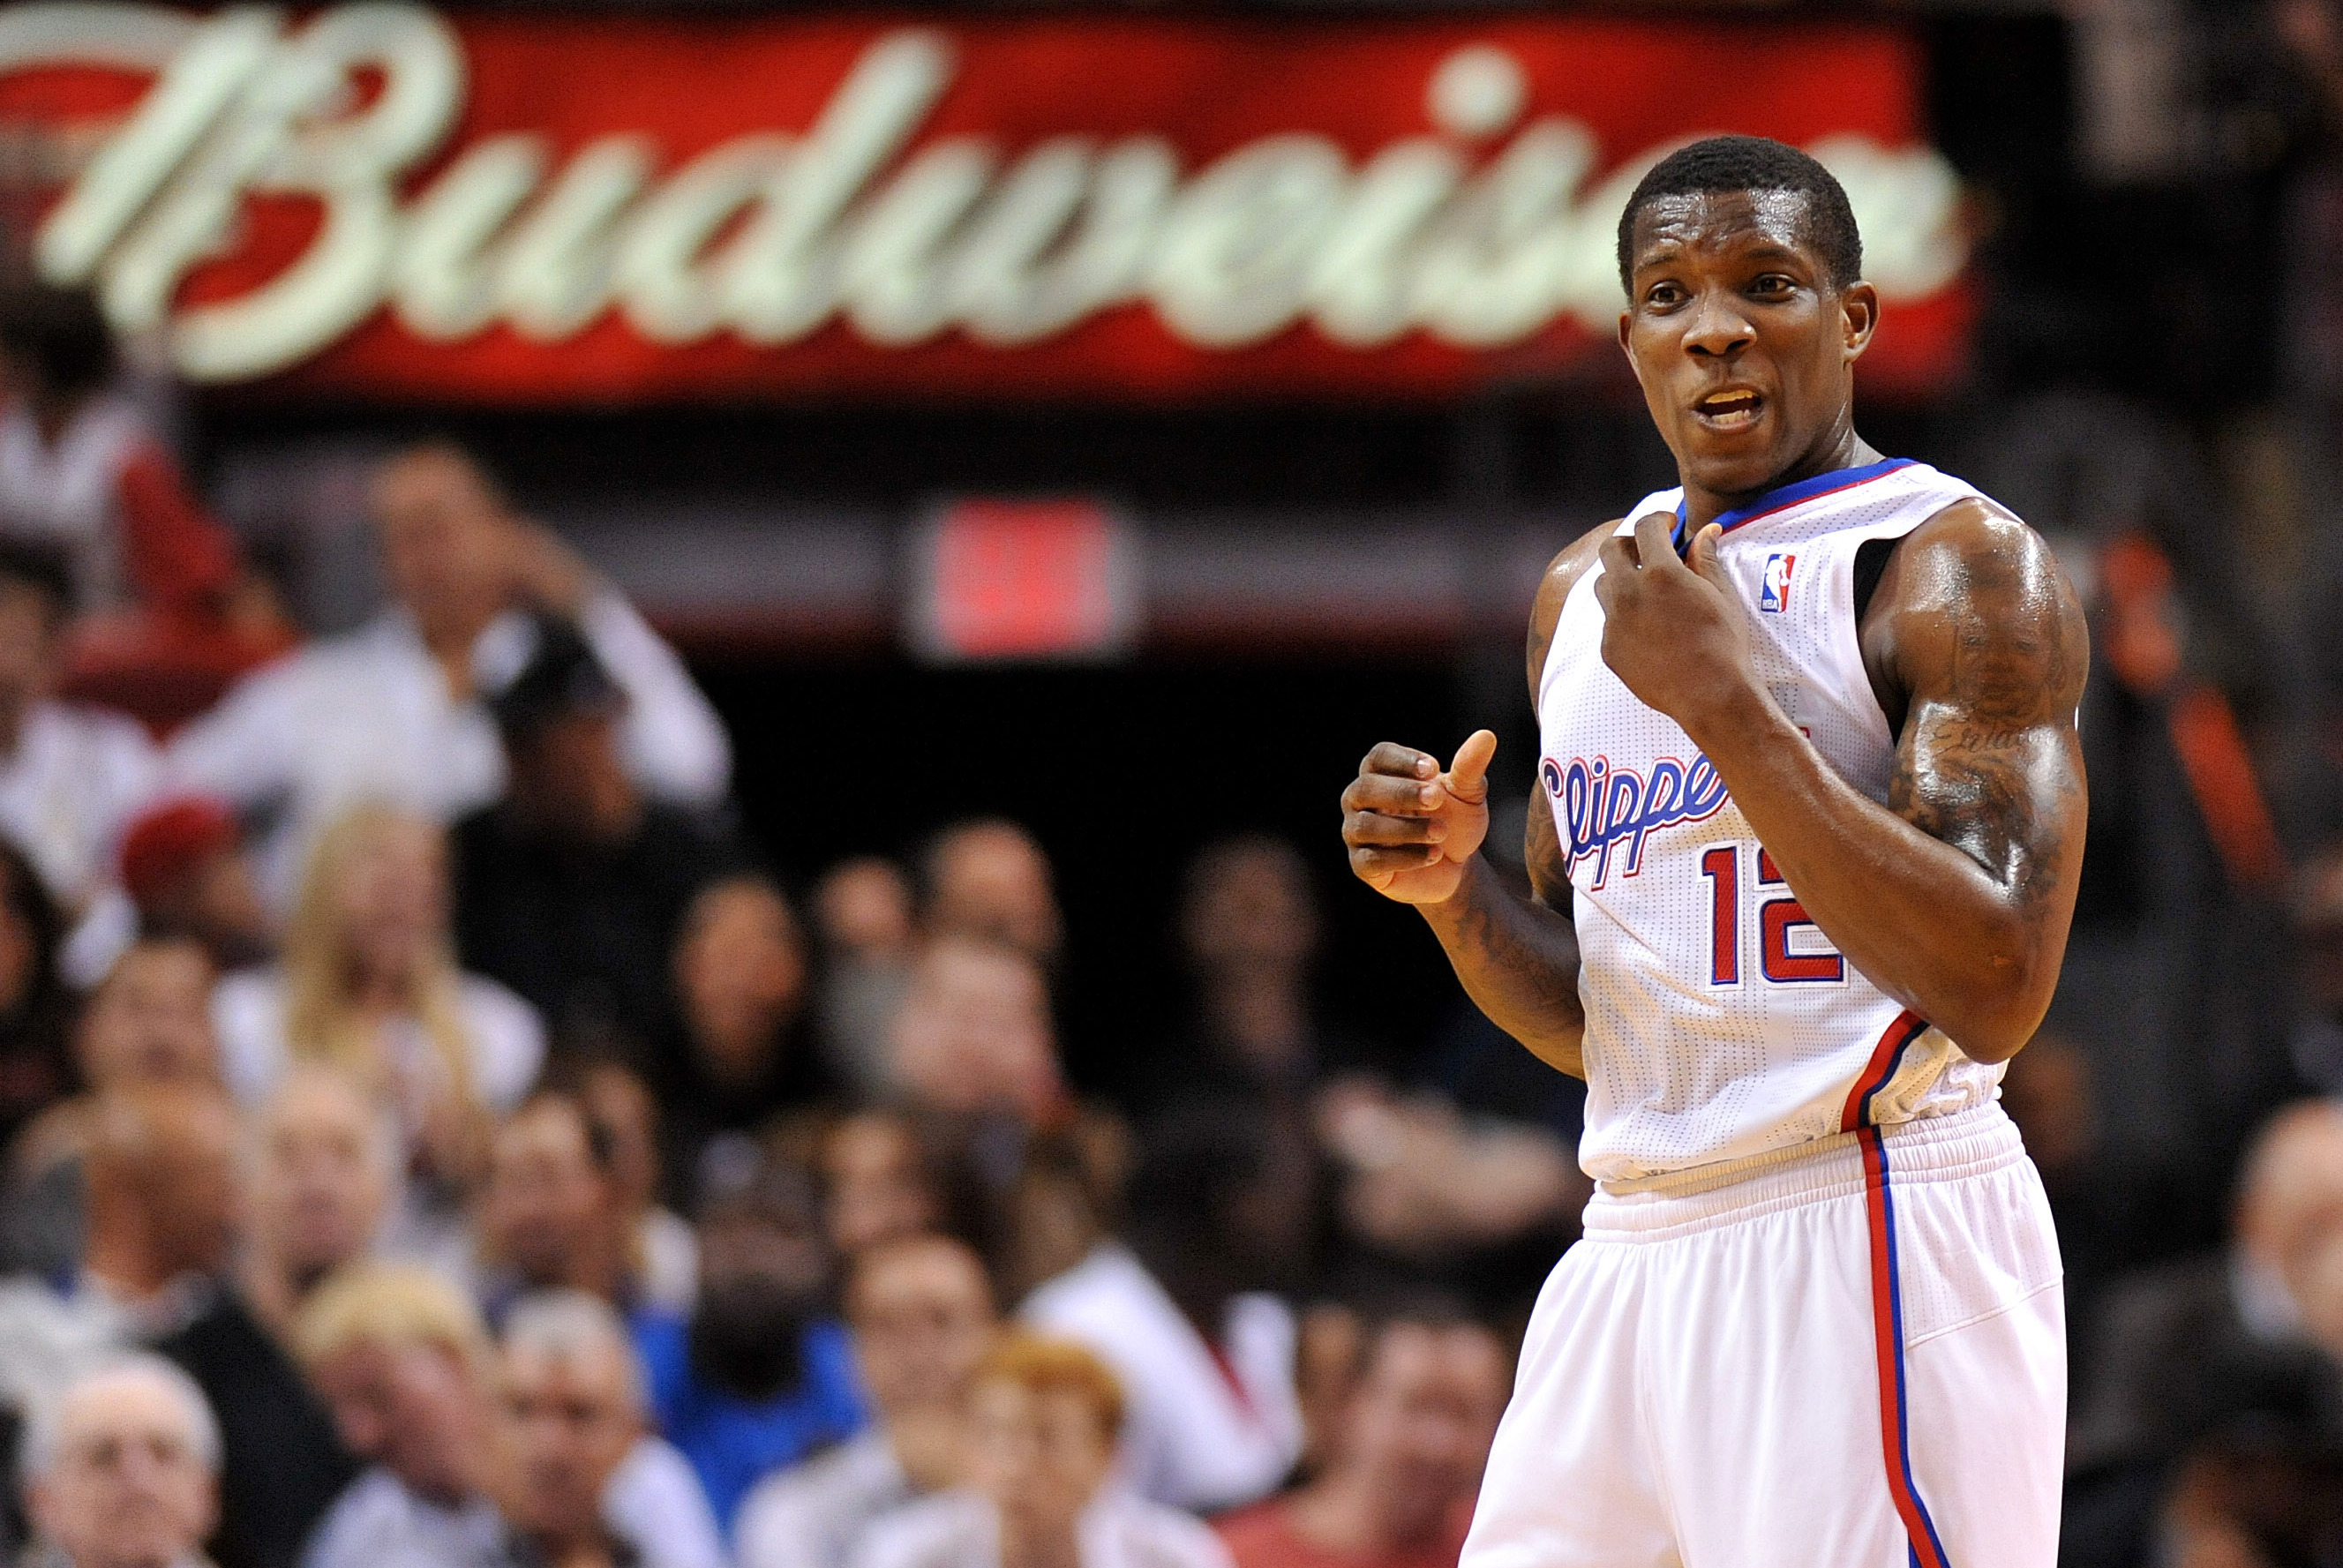 Eric Bledsoe, Scouting report and accolades